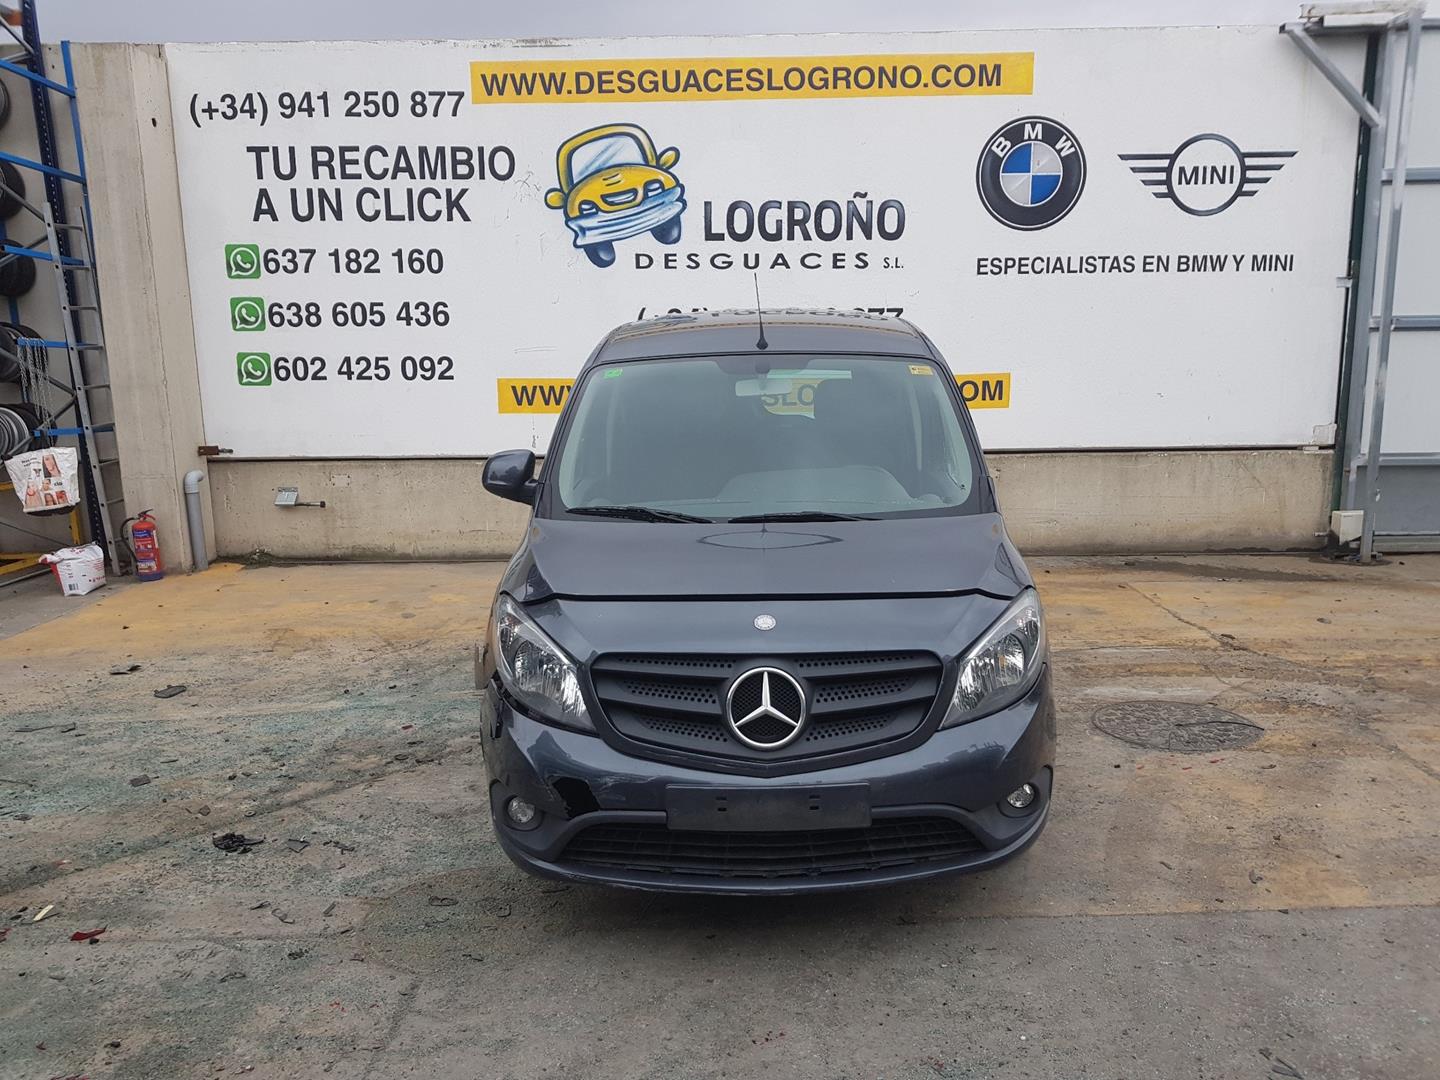 MERCEDES-BENZ Citan W415 (2012-2021) Front Right Seat ASIENTOTELA, ASIENTOACOMPAÑANTE 24137982